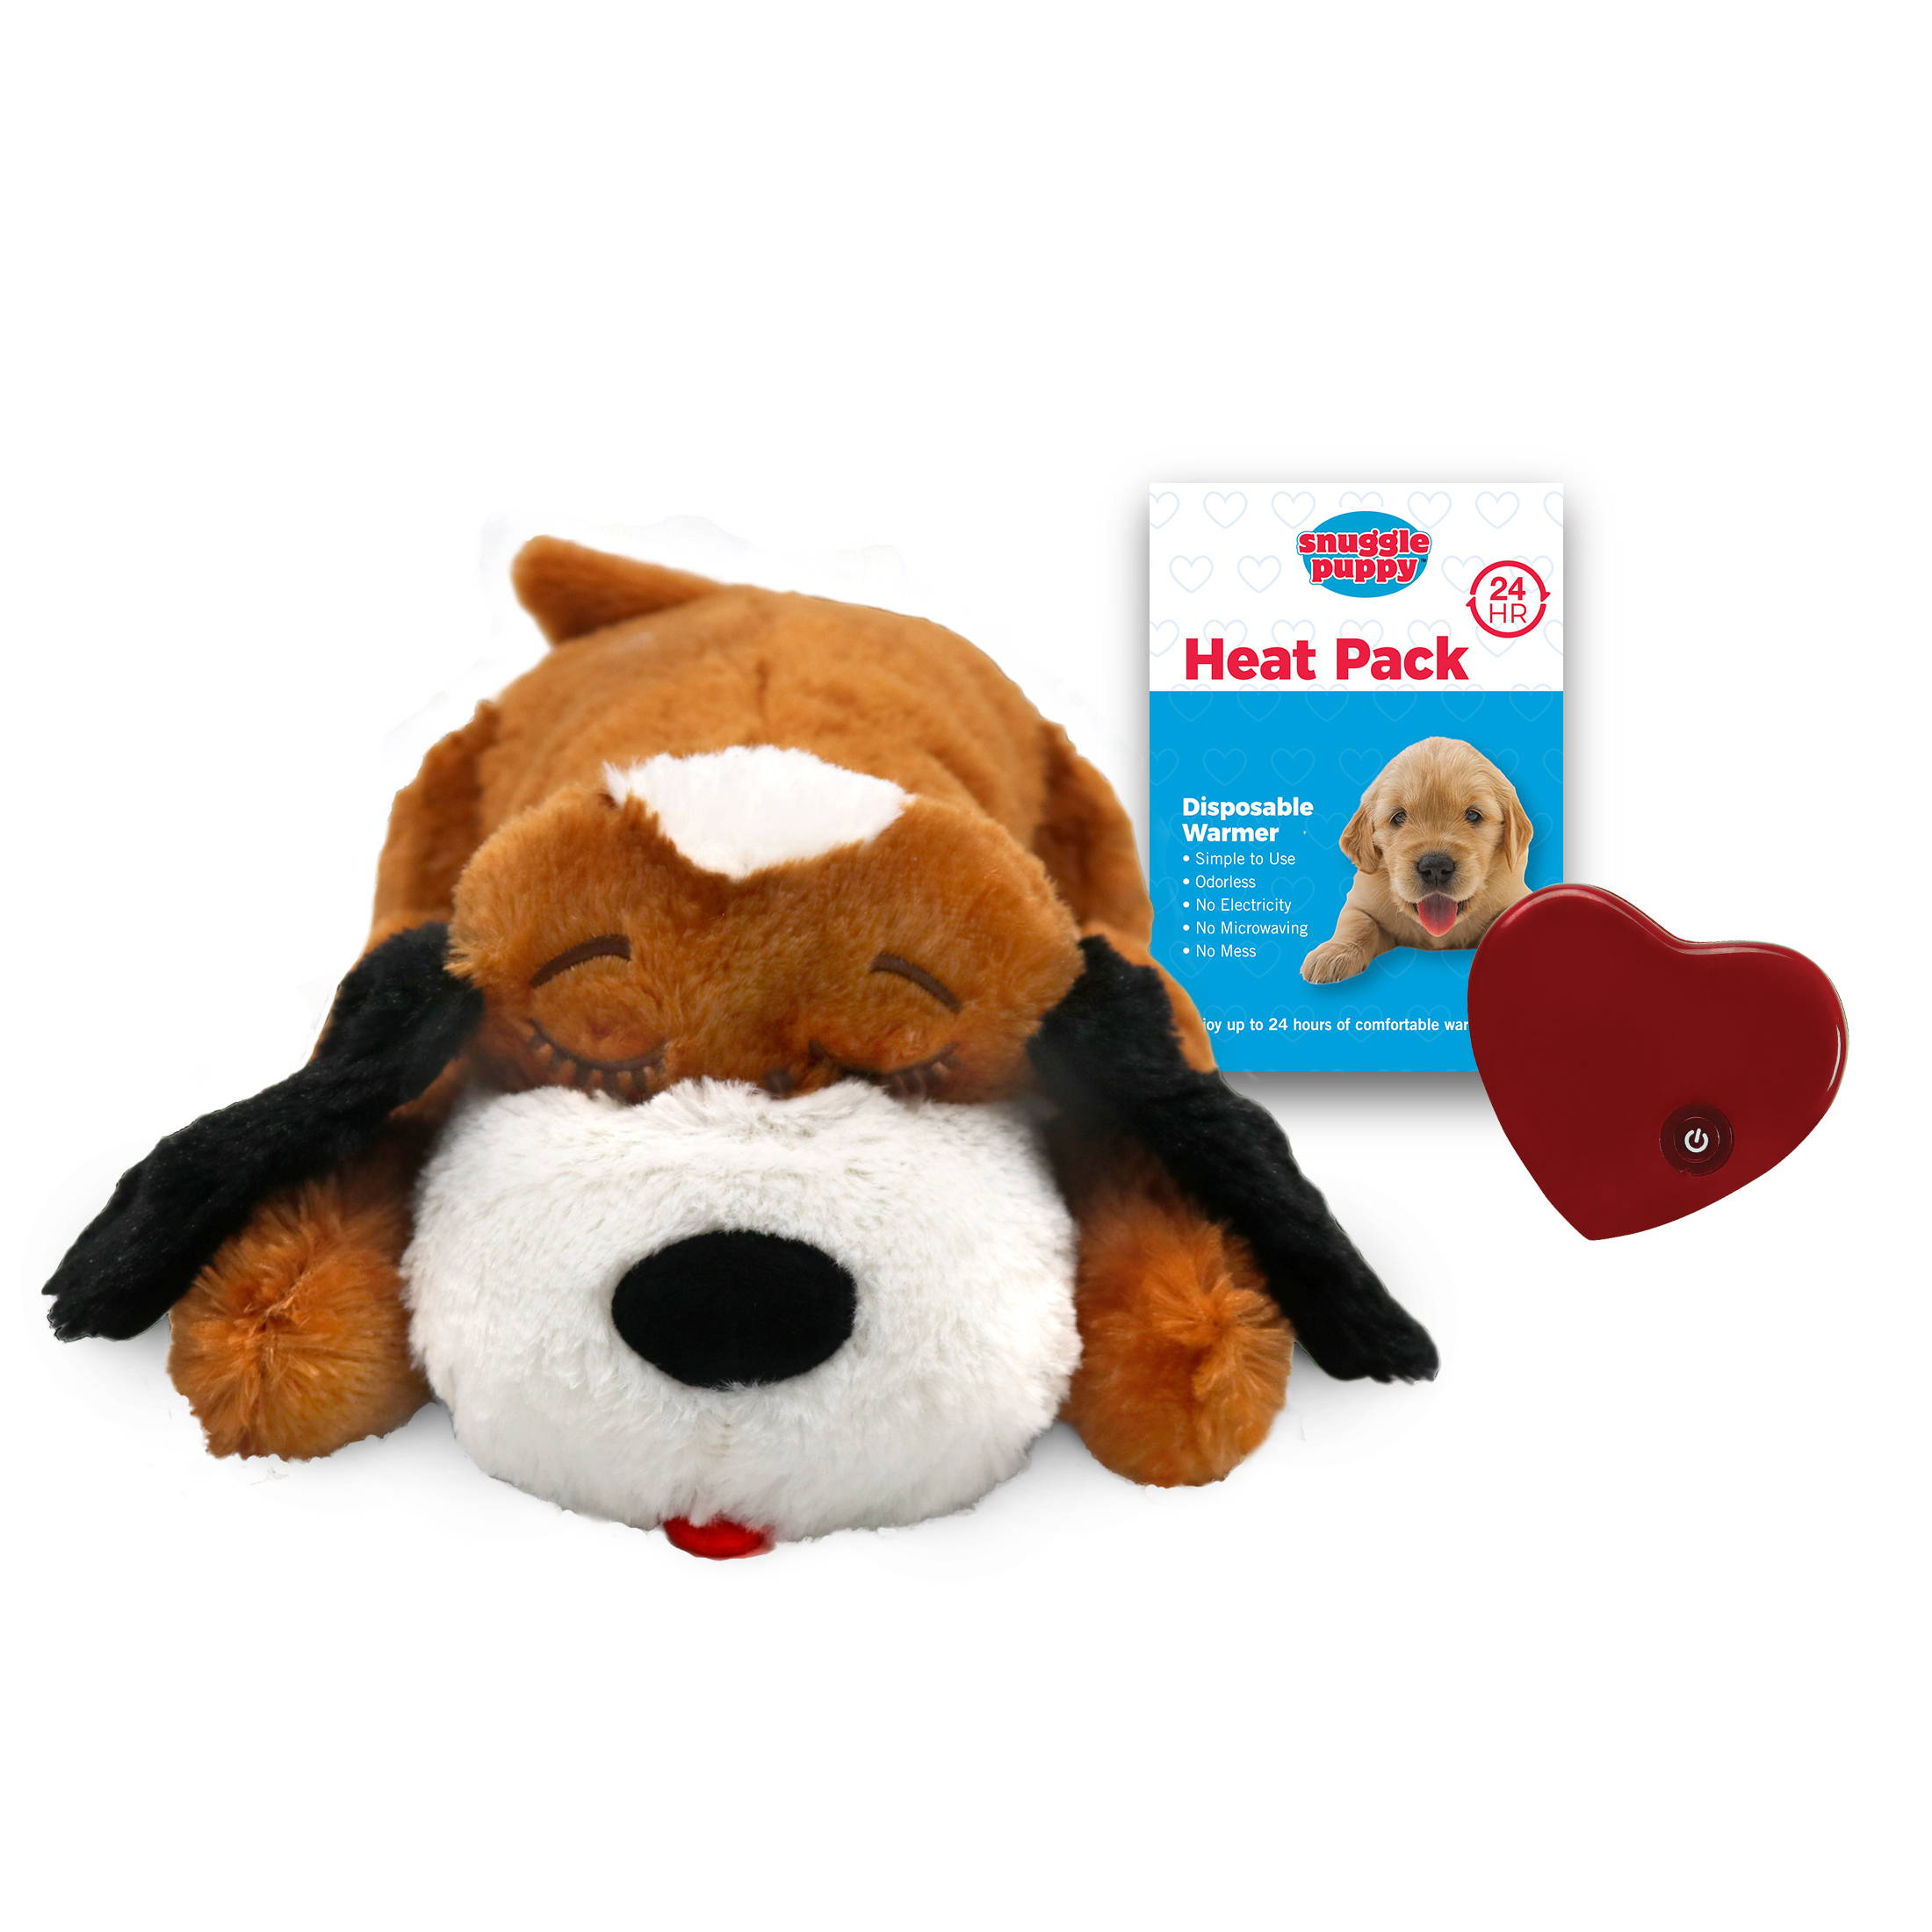 Heartbeat Behavioral Aid Puppy Toy Puppy Heartbeat Toy Sleep Aid Snuggle Puppy Junior Golden 